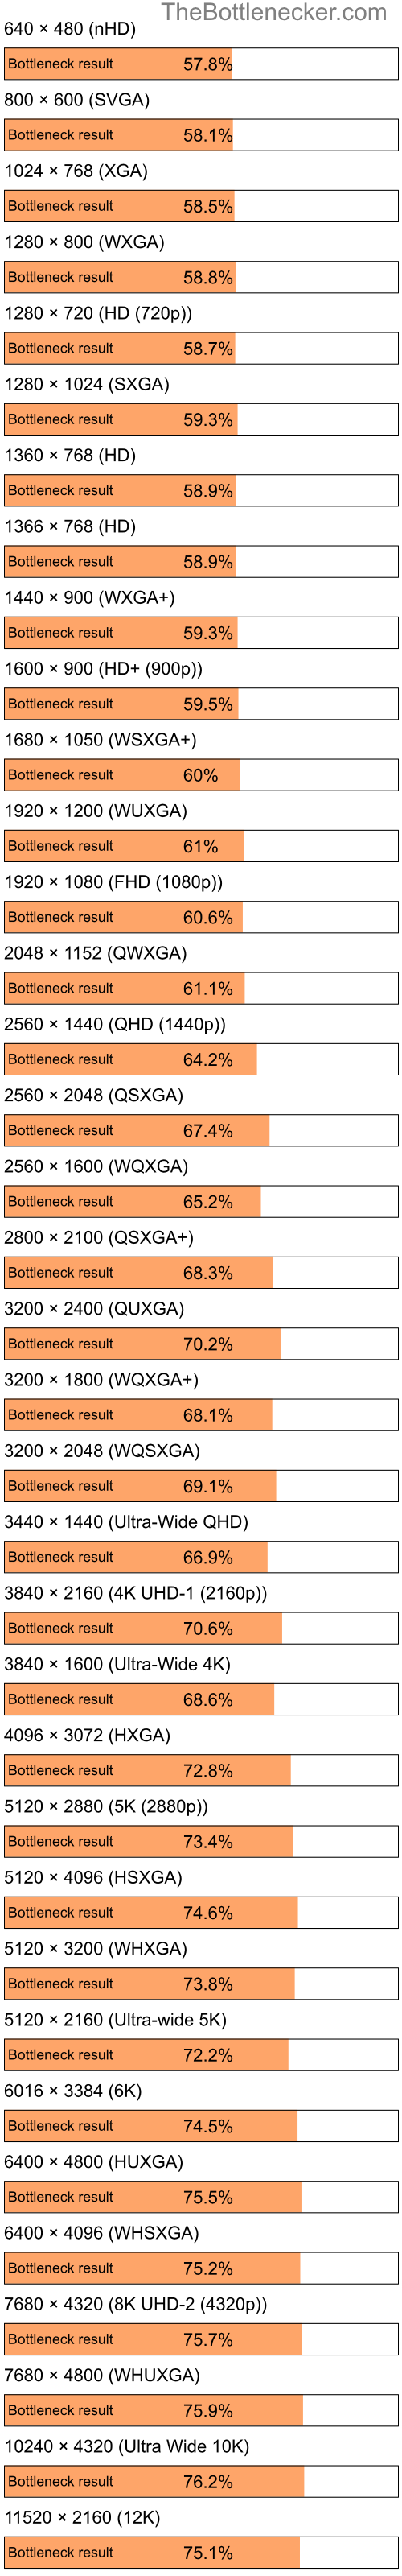 Bottleneck results by resolution for Intel Celeron M 410 and AMD Radeon X700 PRO in Processor Intense Tasks